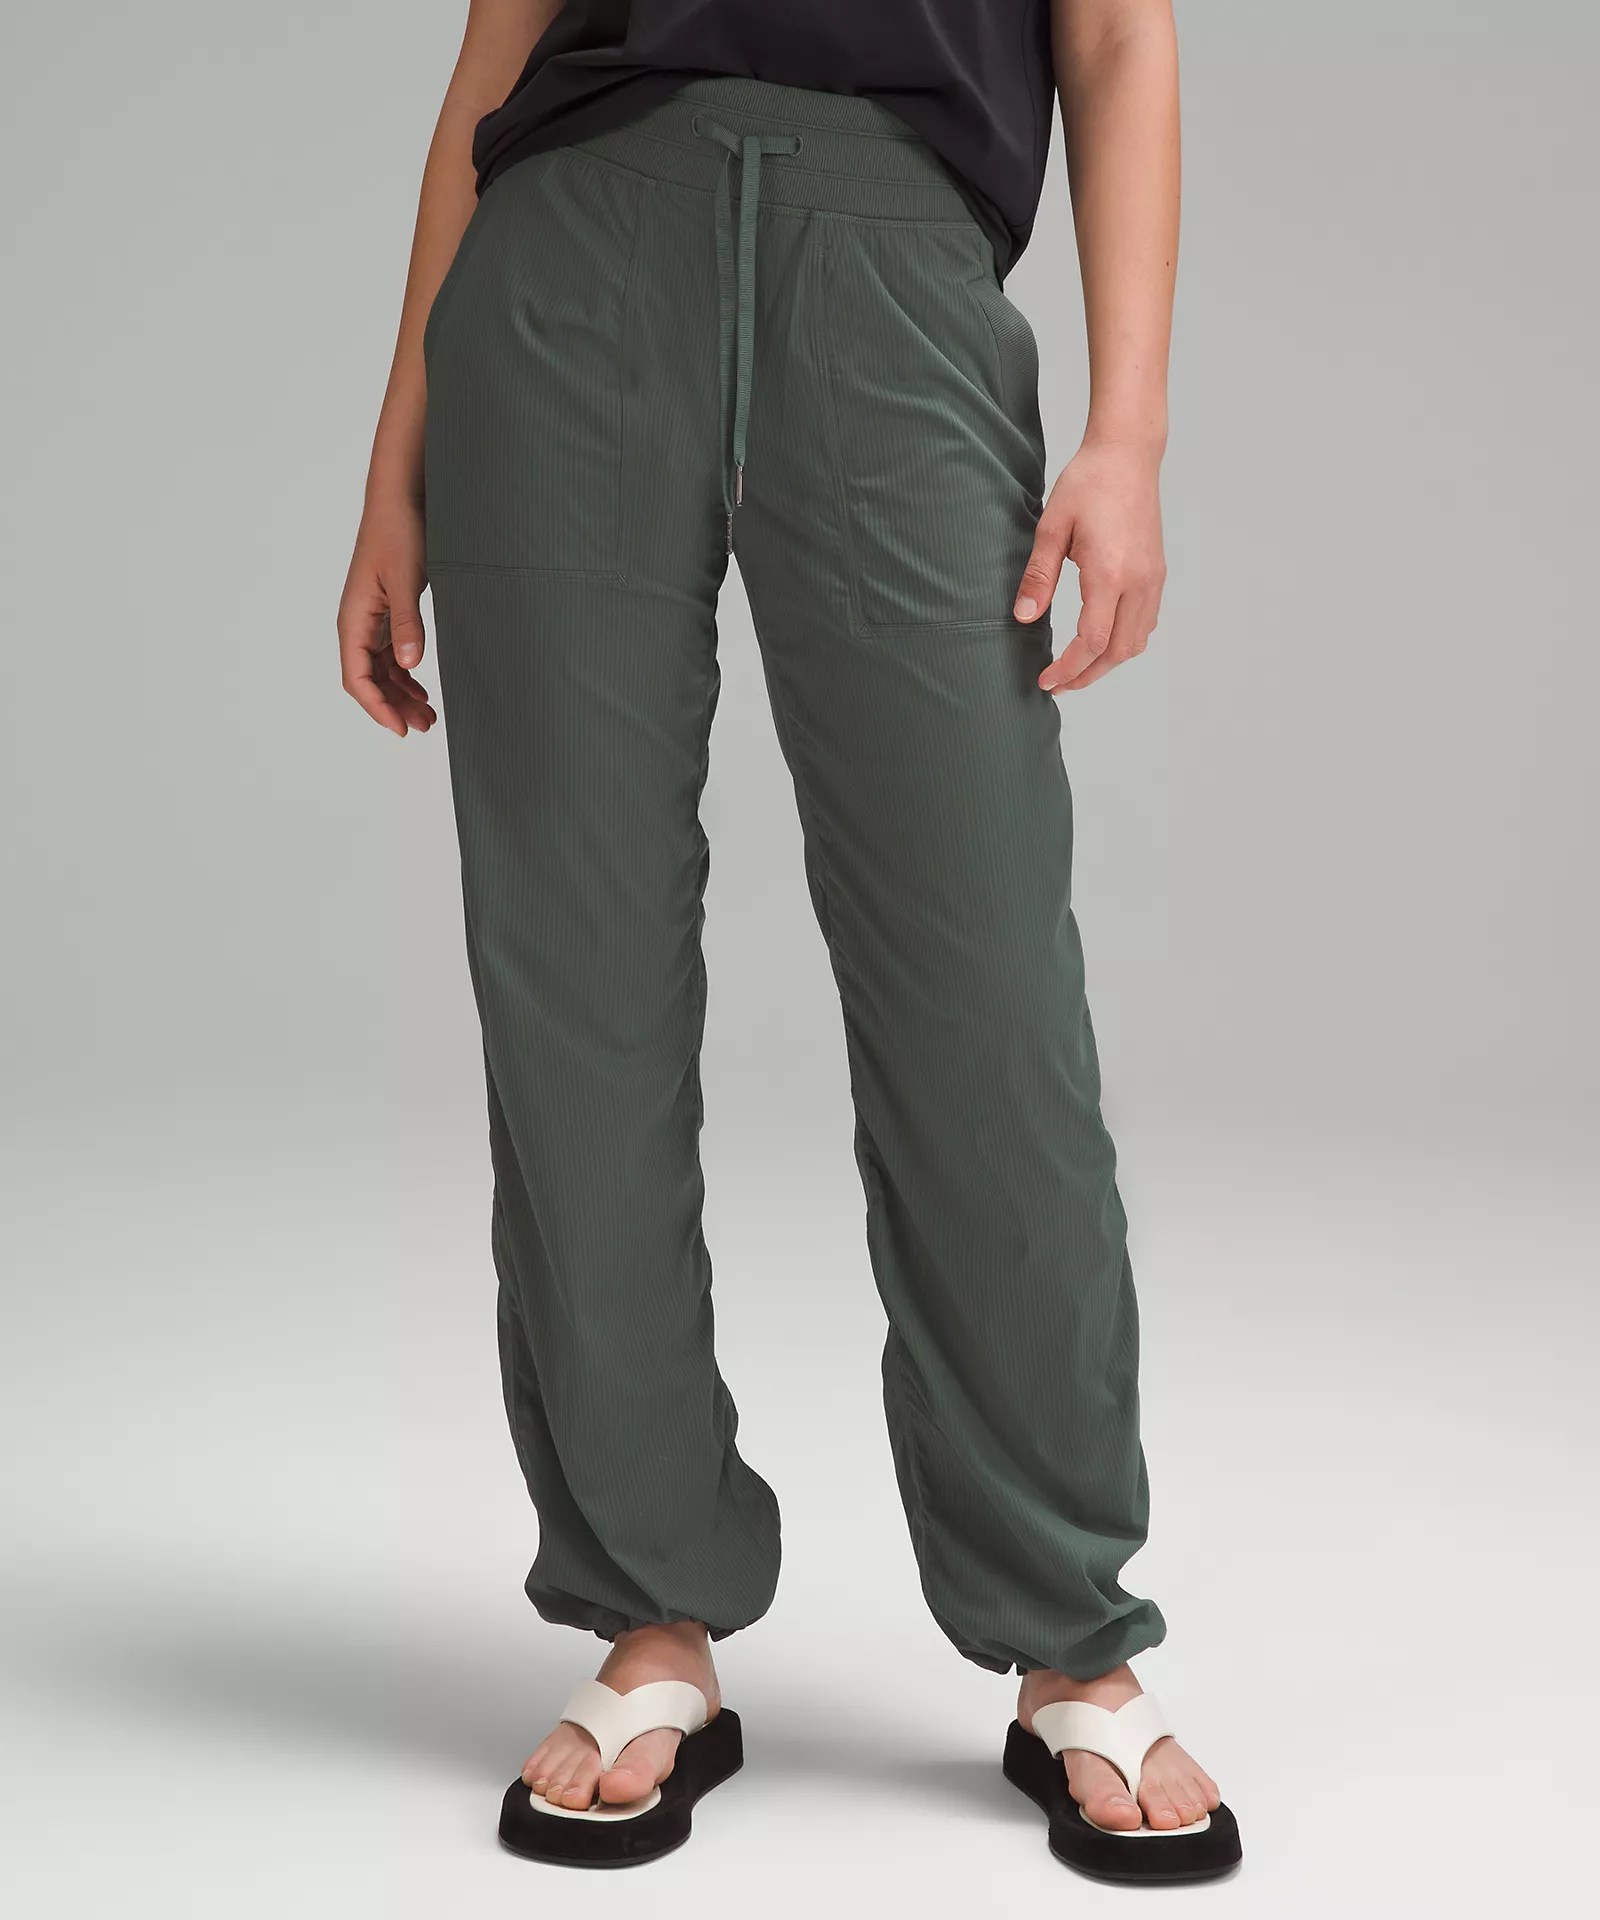 a person wearing dance studio pants, one of the best lululemon products